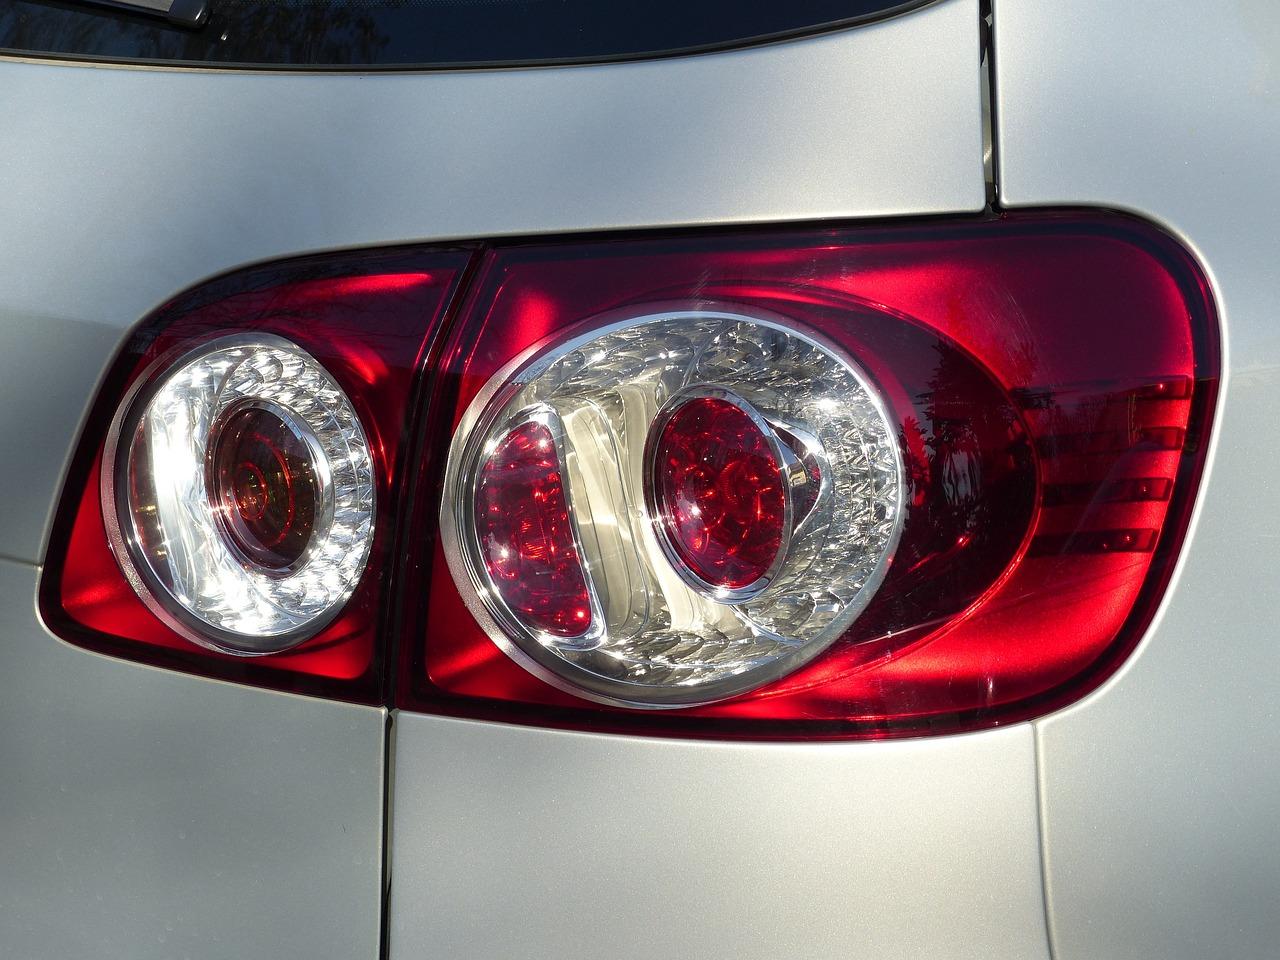 How many reverse lights does a golf have? 